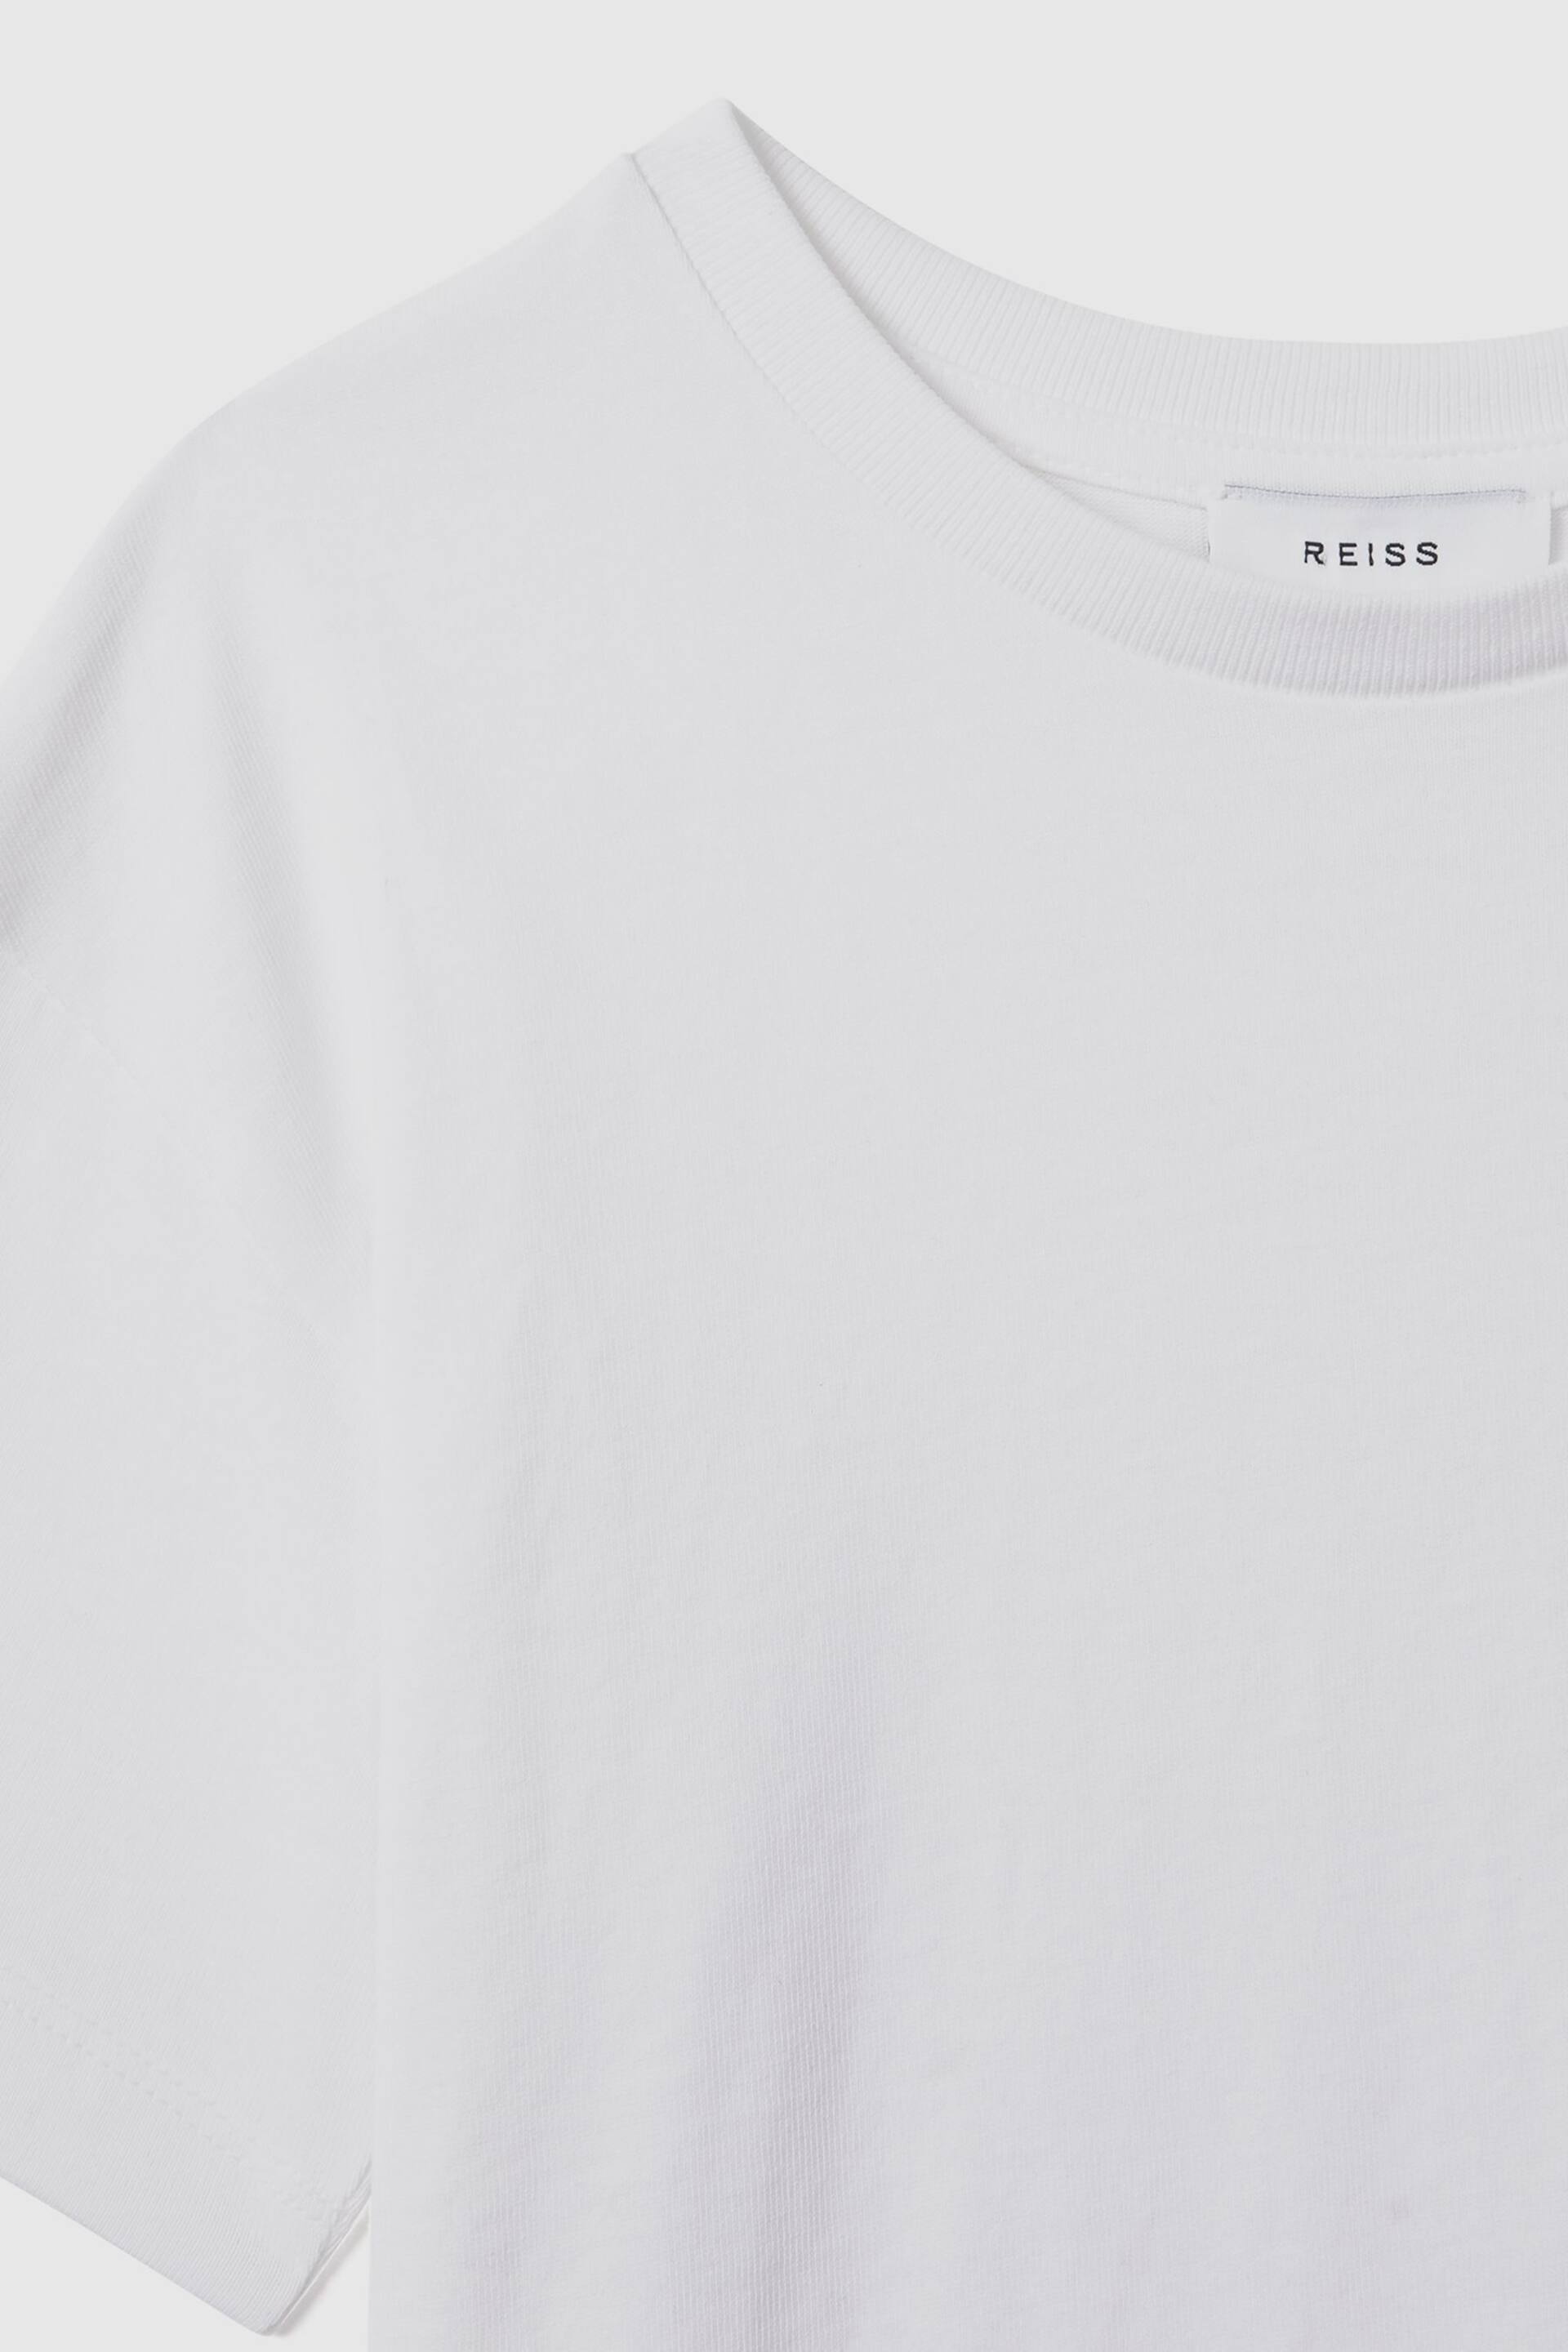 Reiss White Selby Junior Oversized Cotton Crew Neck T-Shirt - Image 4 of 6